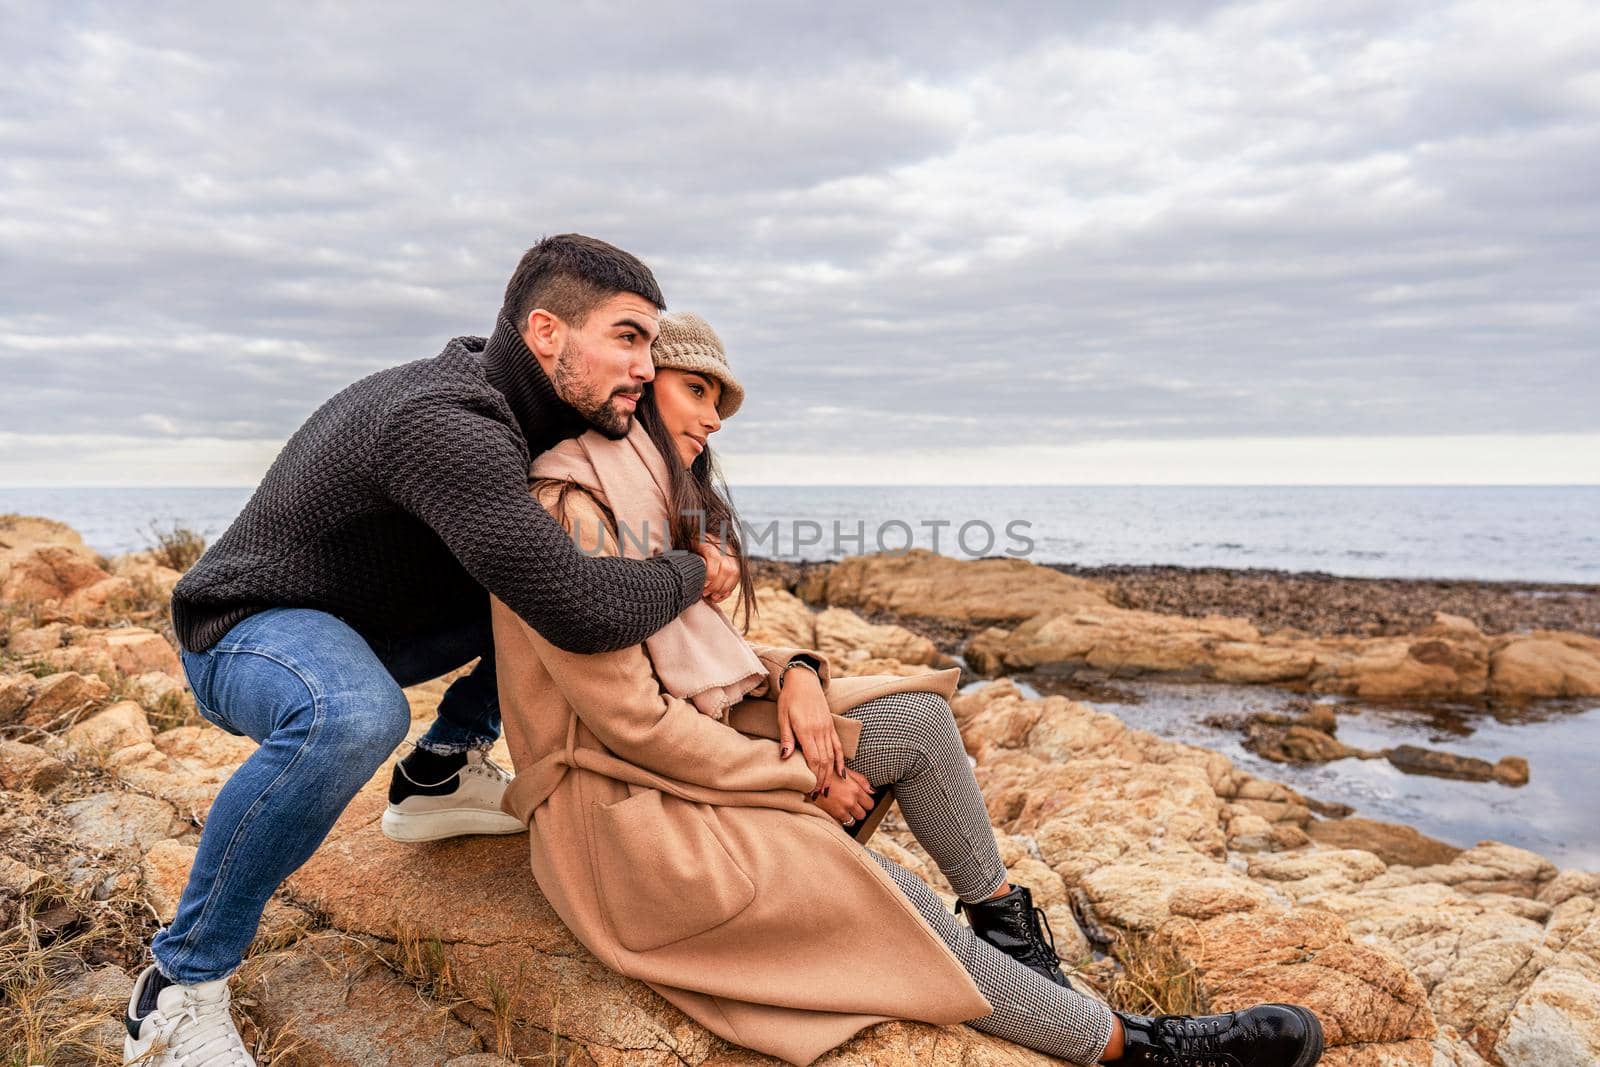 Beautiful heterosexual mixed race couple outdoor live a tenderness moment sitting on sea resort rocks - Caucasian handsome guy embracing his Hispanic girlfriend in the nature with orange color mood by robbyfontanesi